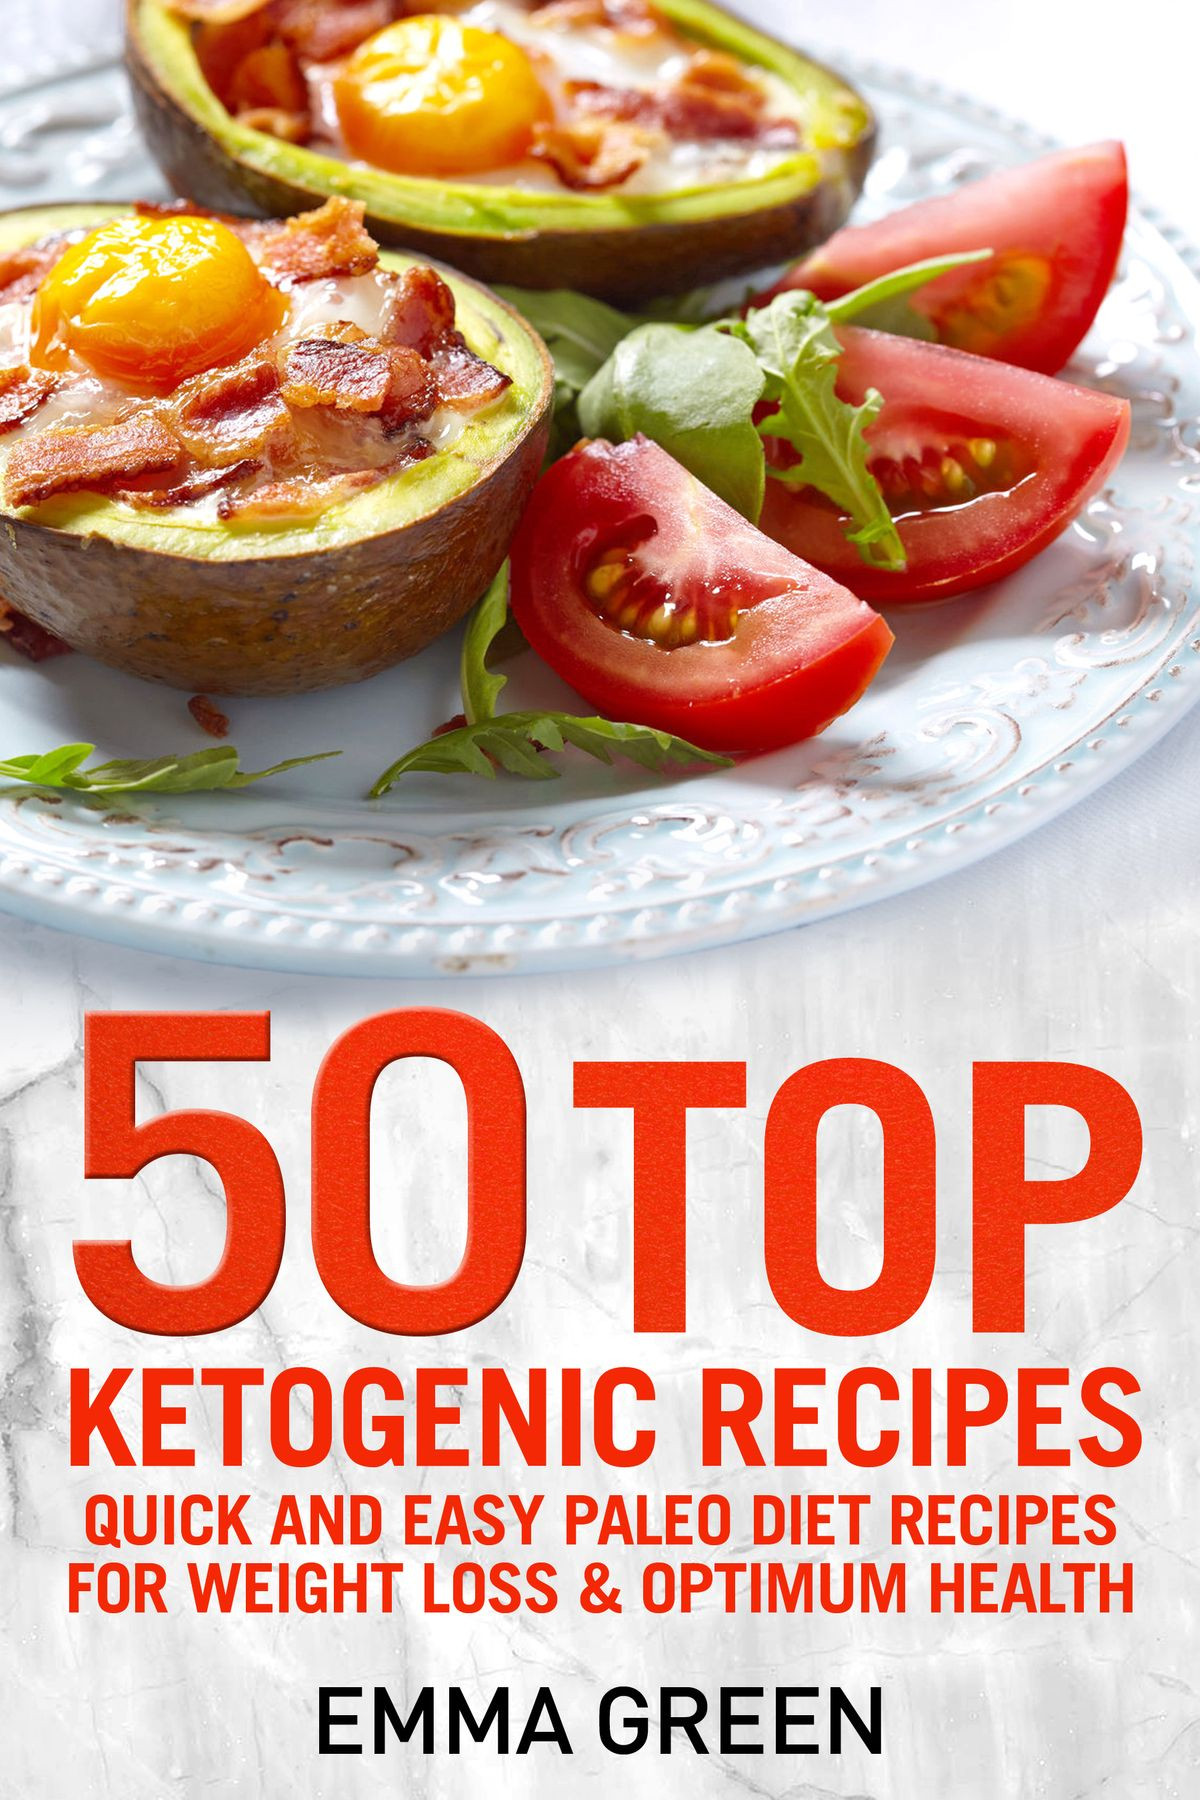 Quick And Easy Keto Recipes
 50 Top Ketogenic Recipes Quick and Easy Keto Diet Recipes